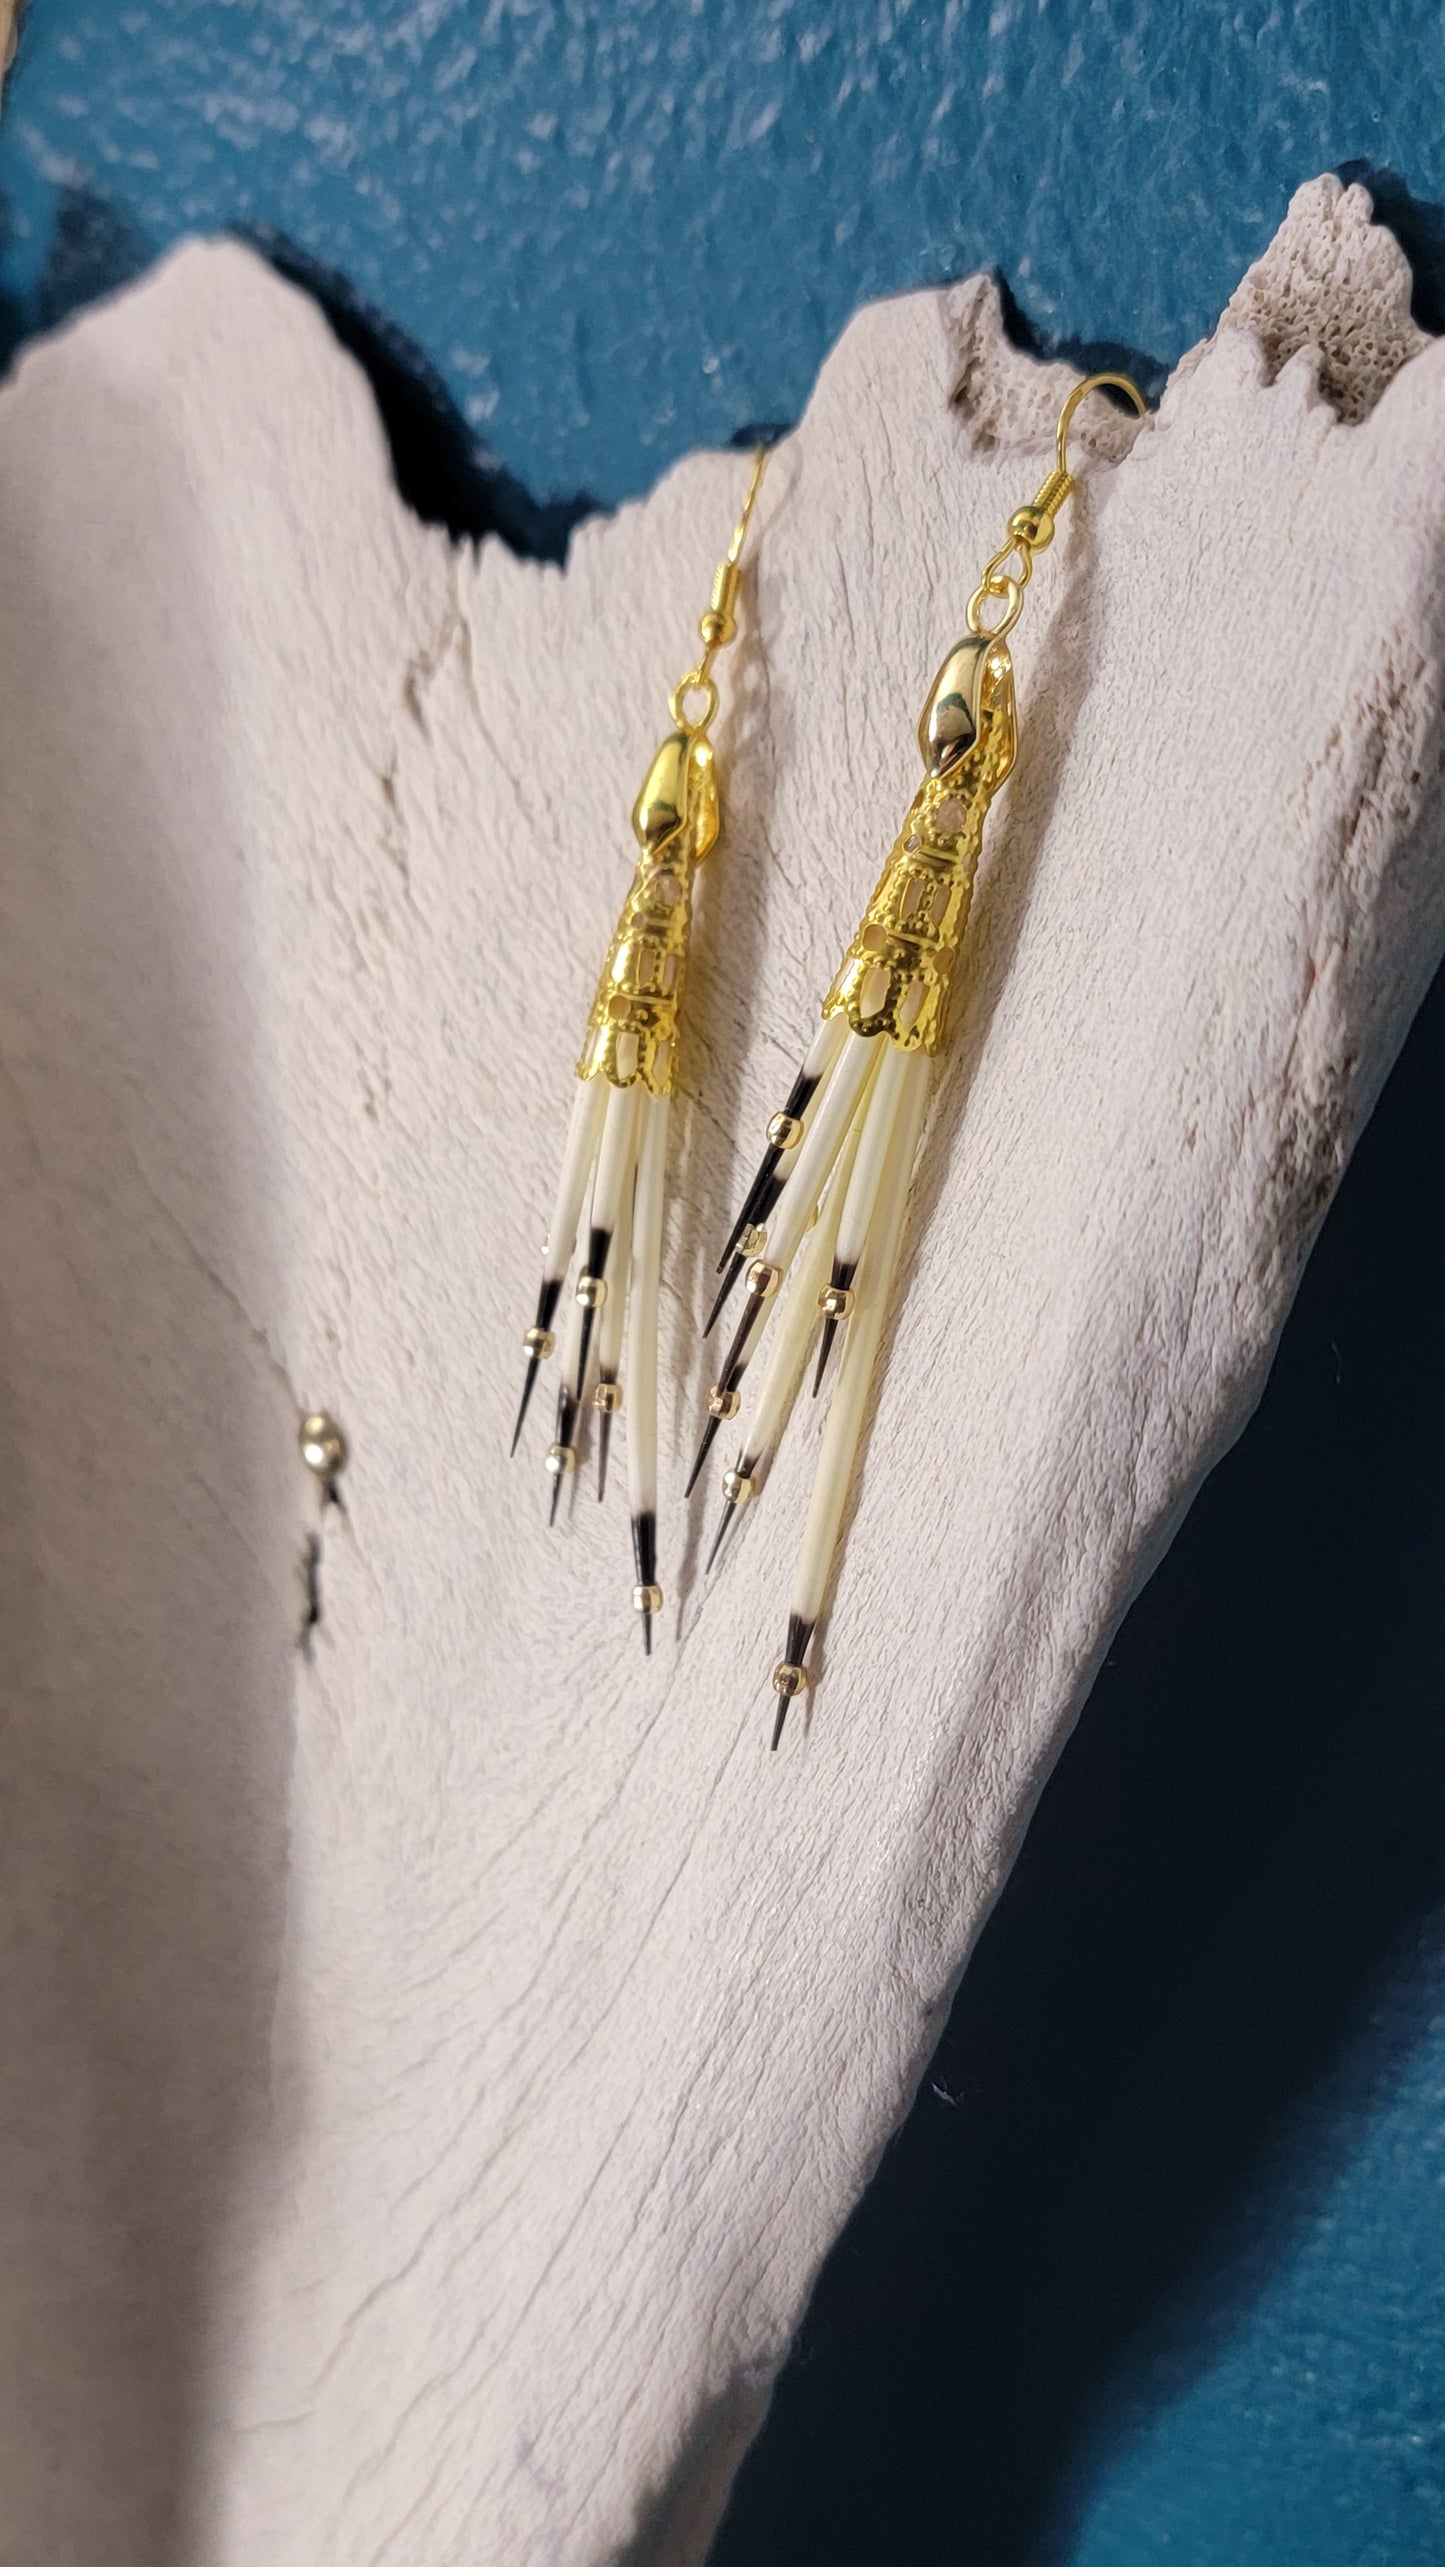 Porcupine Quill with Ornate Gold Cap Earrings